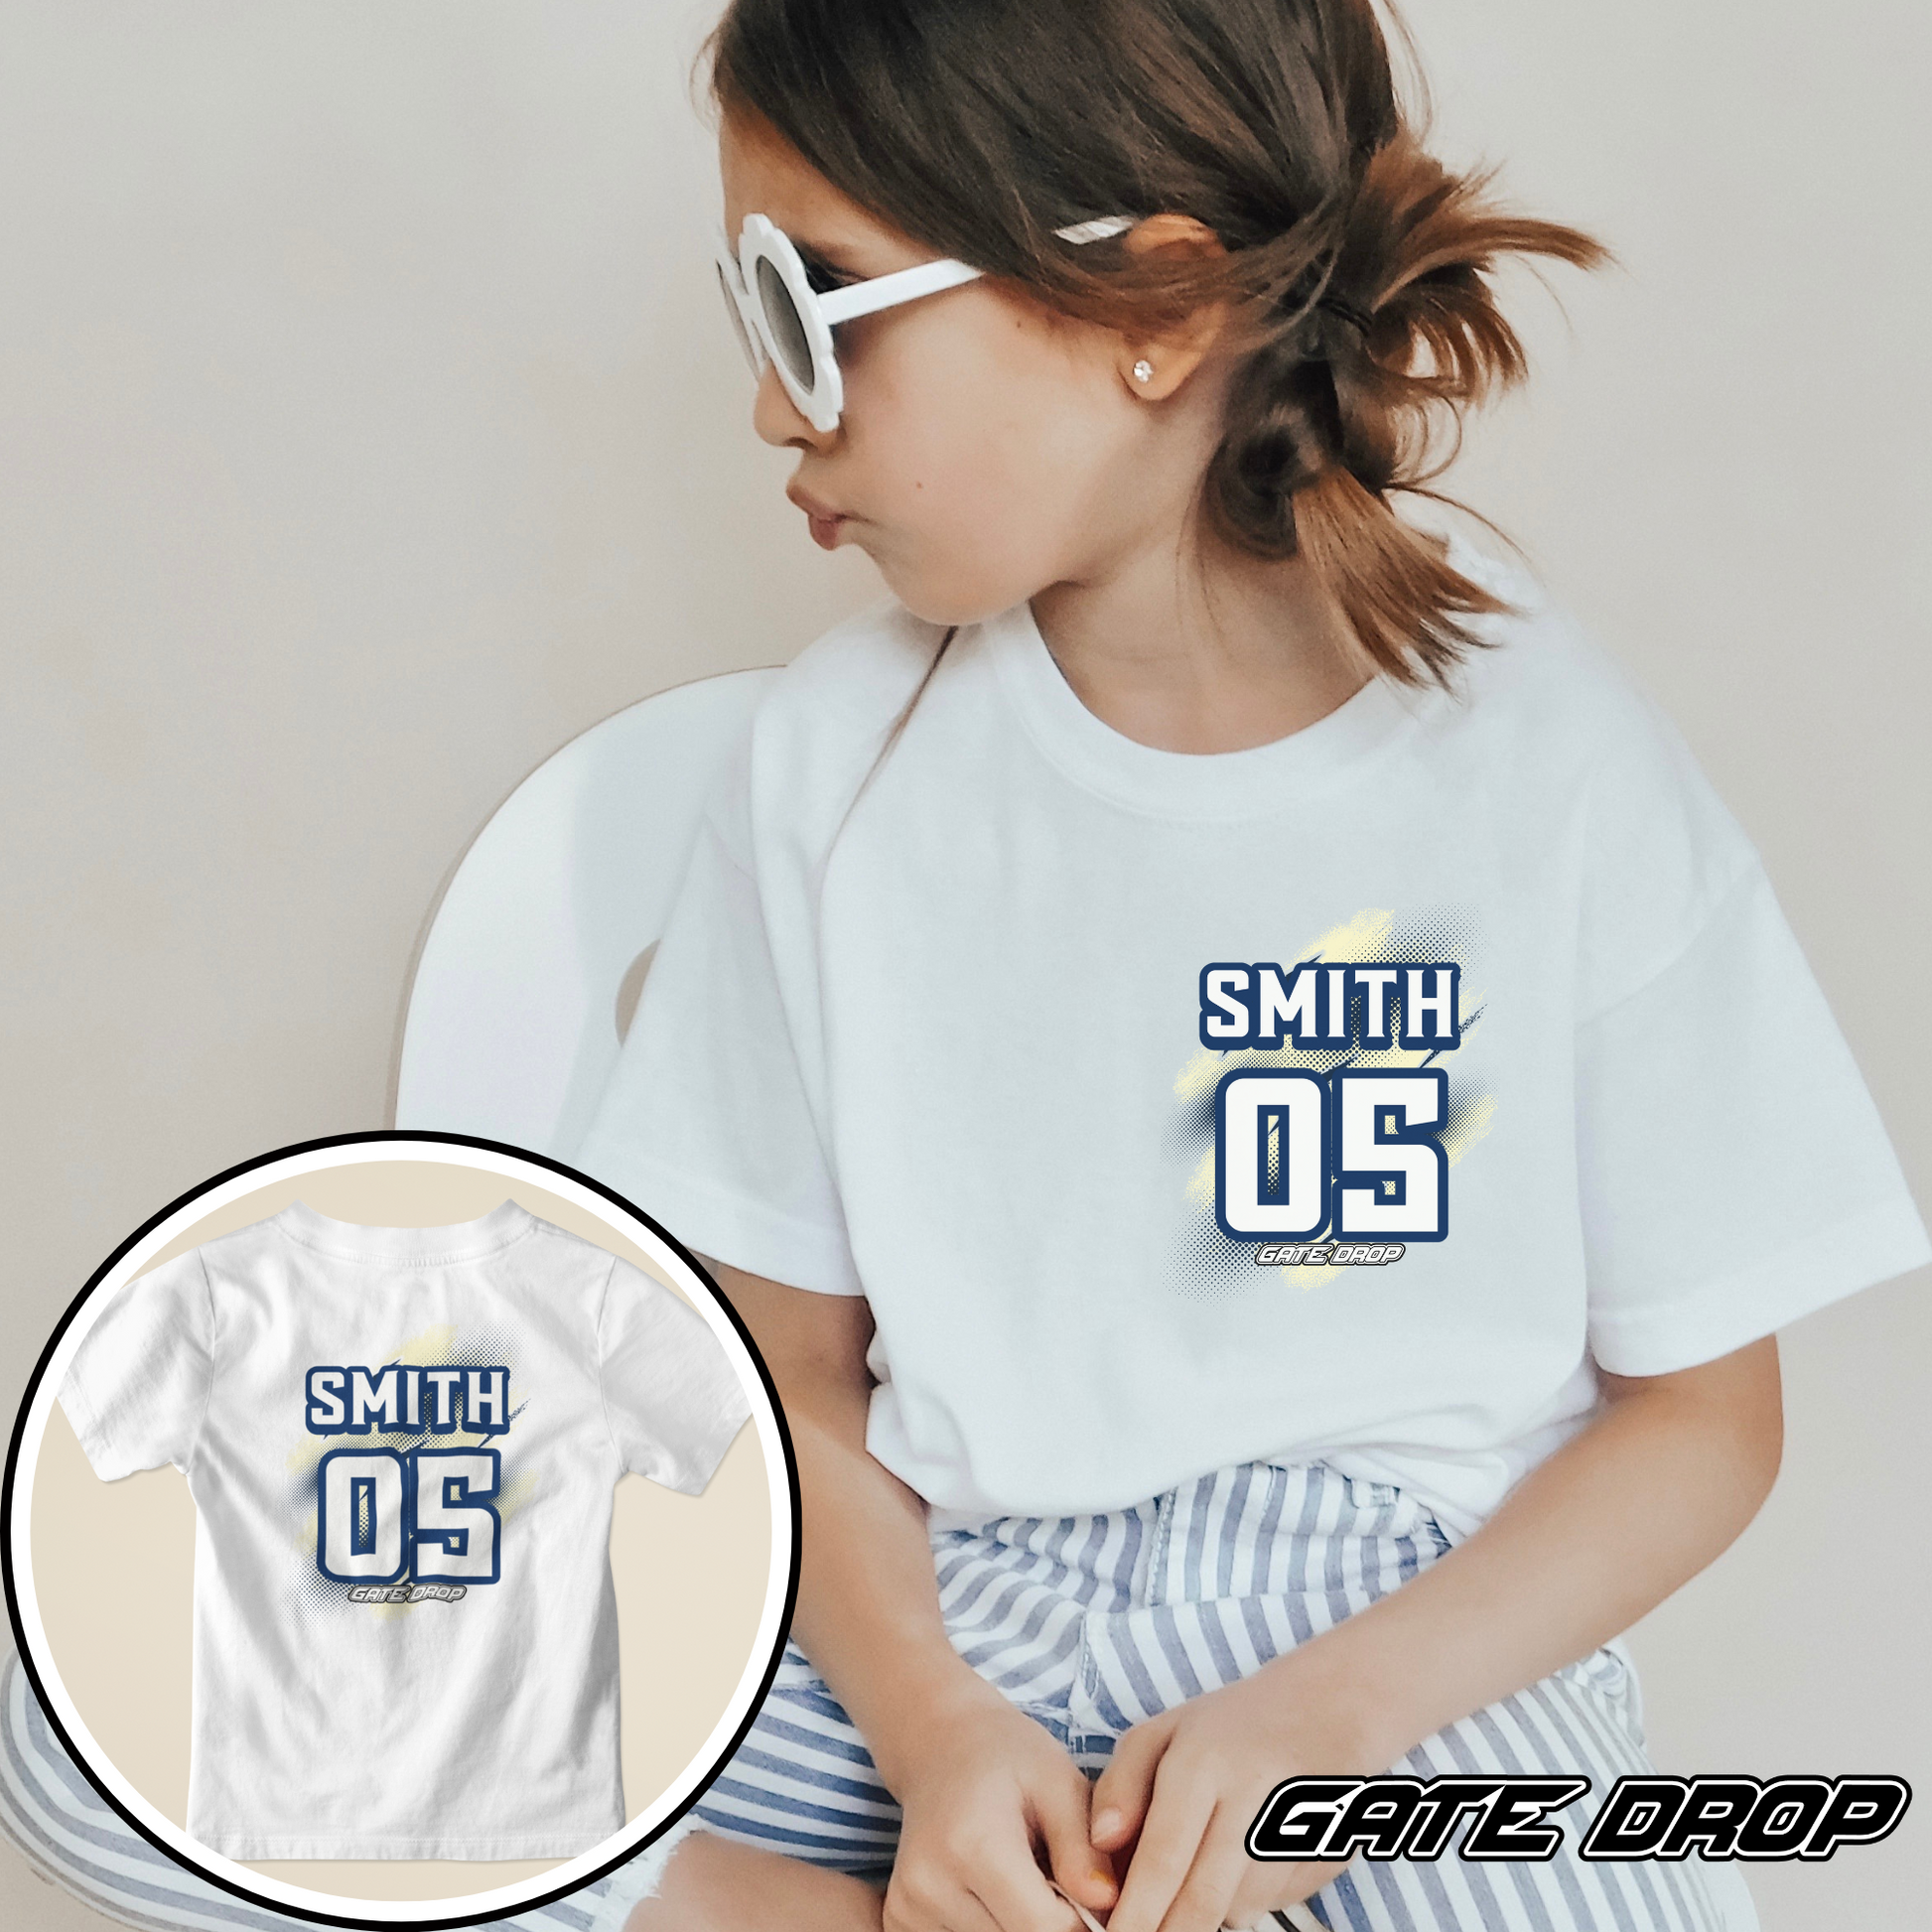 Gate Drop Personalized Name and Number Moto Youth Race Tee Shirt